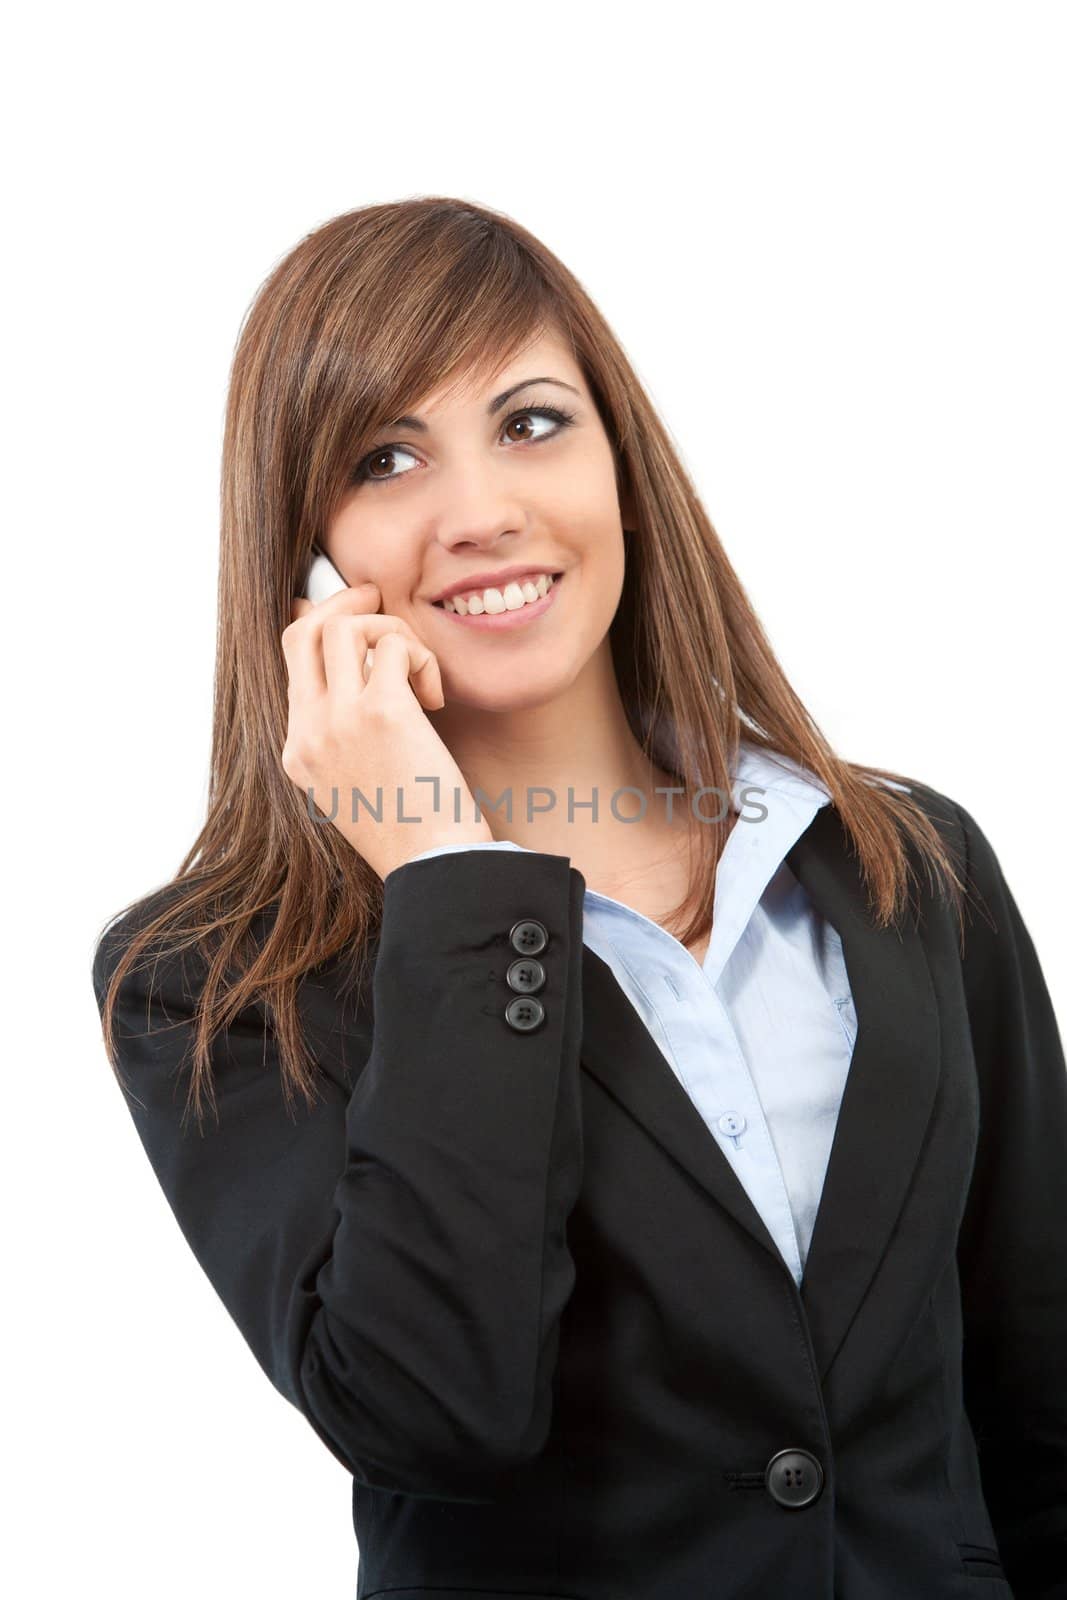 Portrait of smiling business woman on cell phone. by karelnoppe